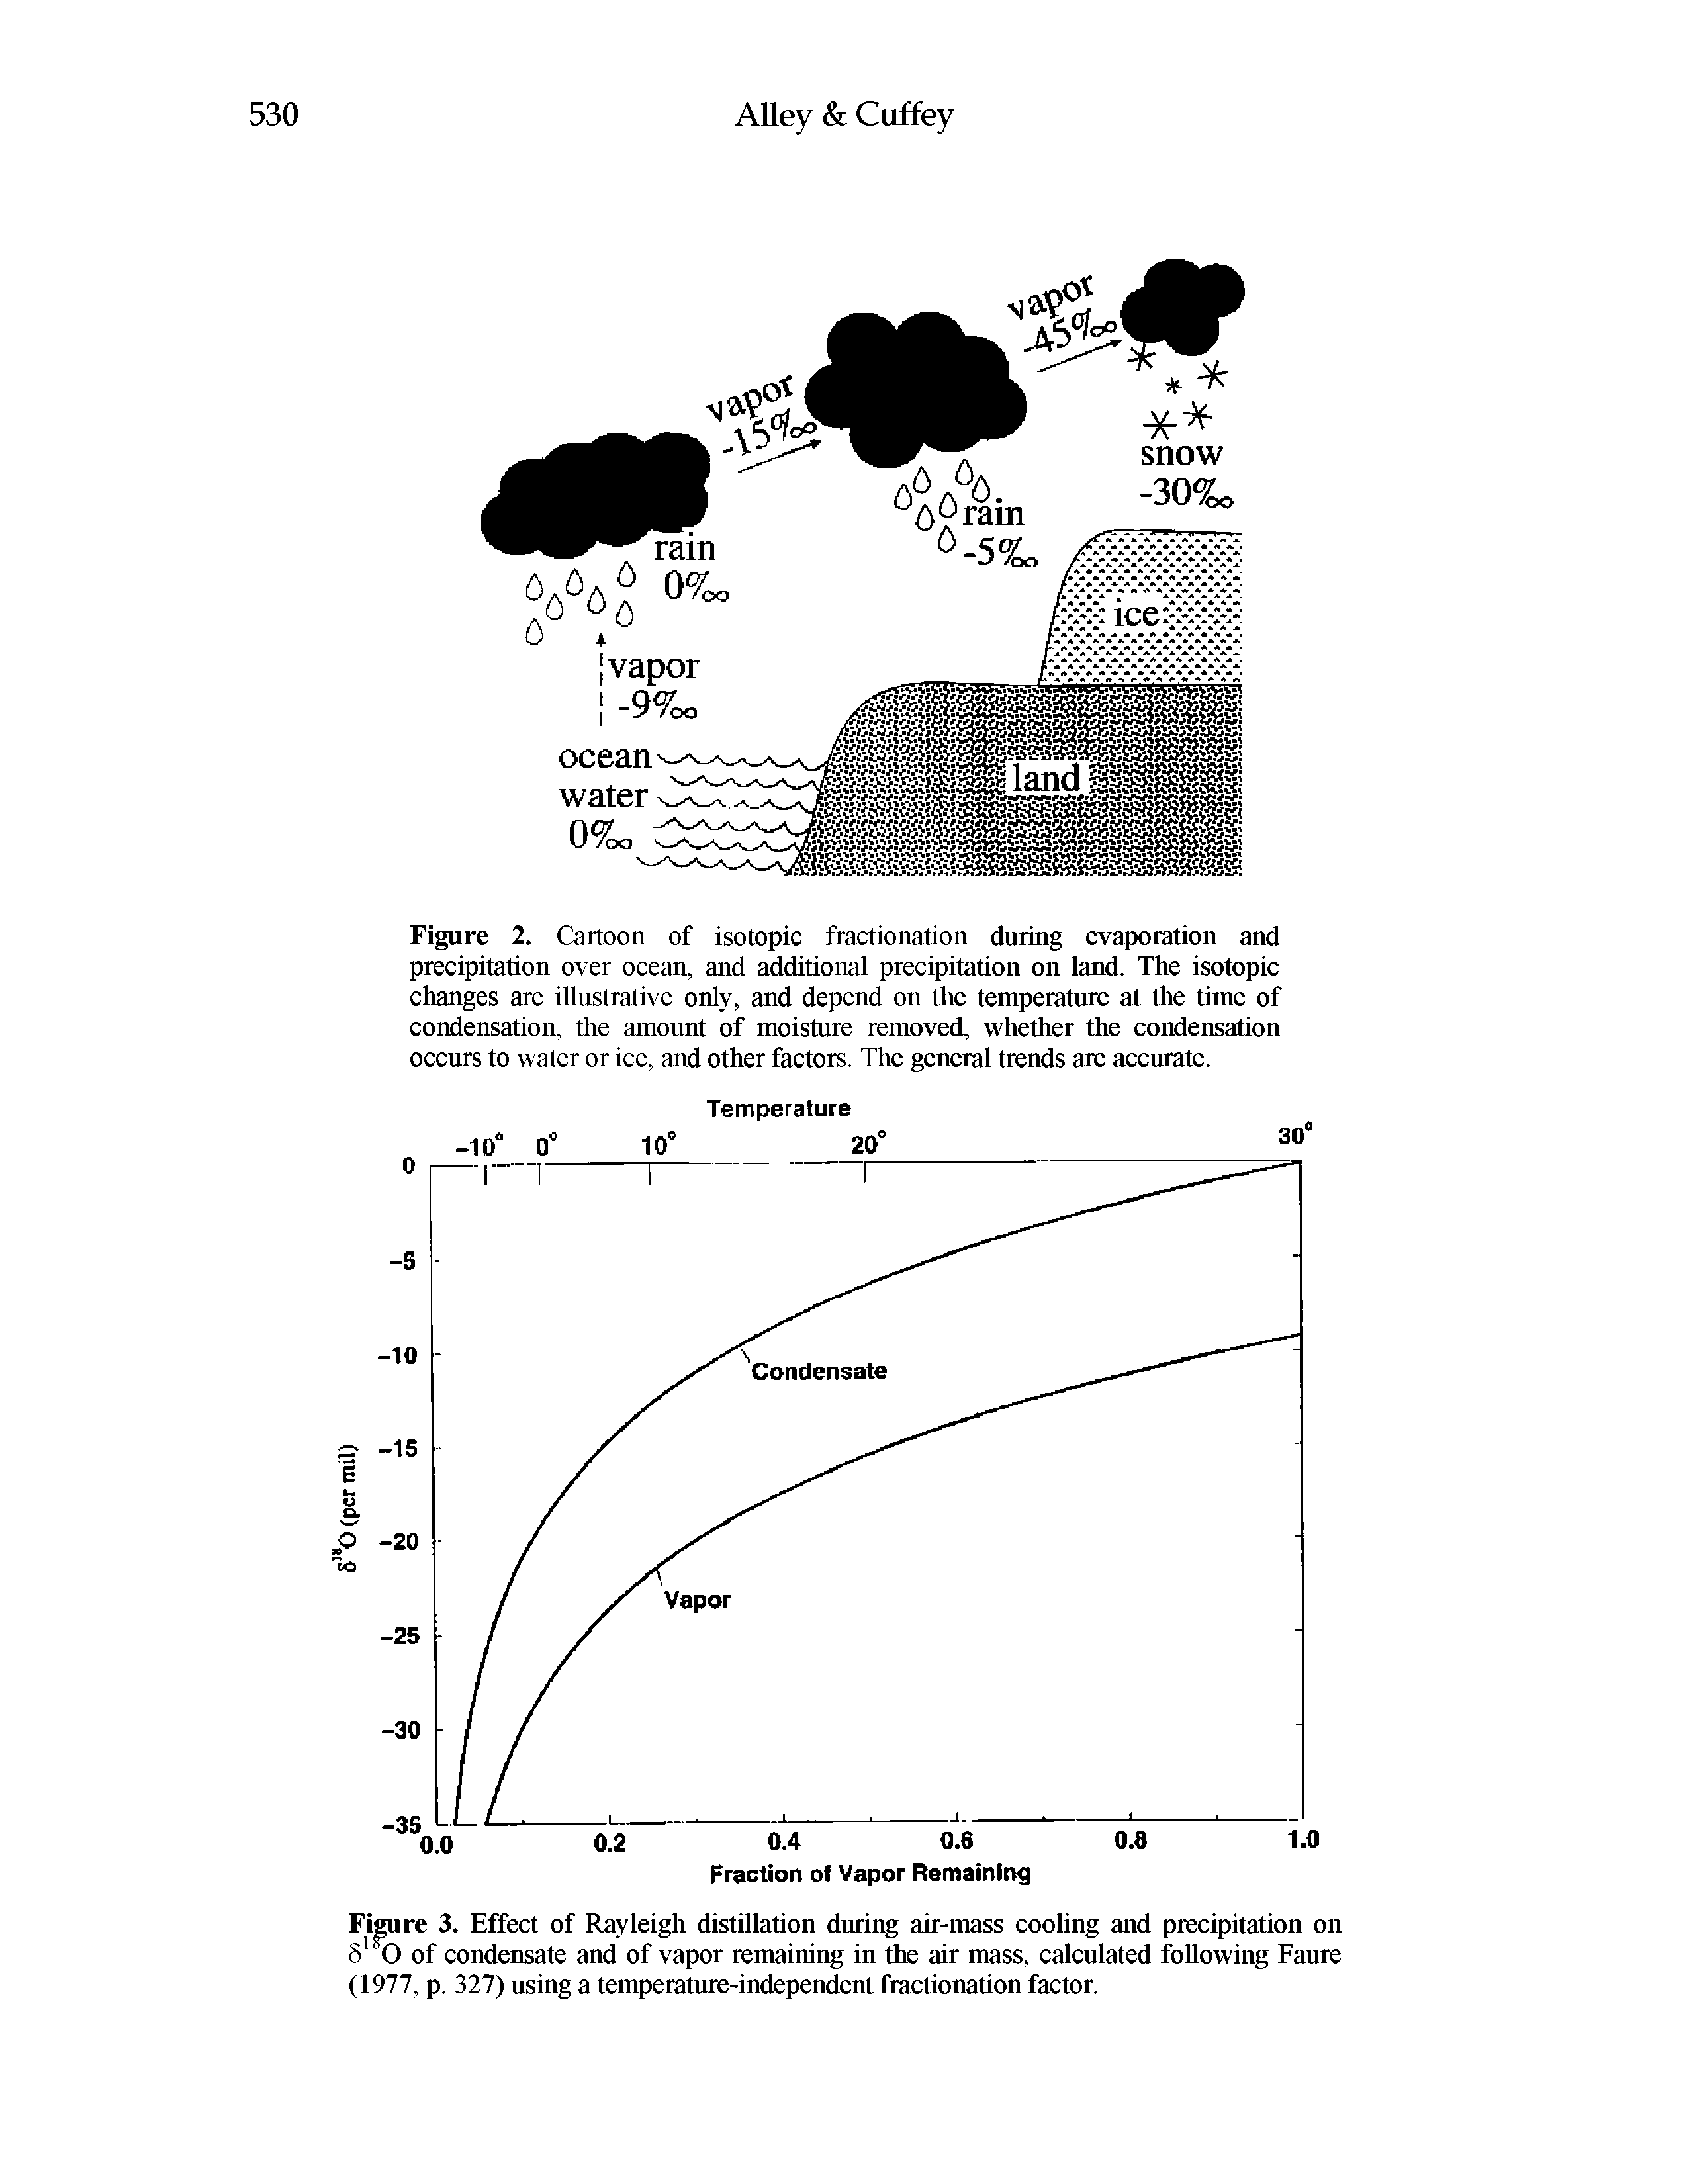 Figure 2. Cartoon of isotopic fractionation during evaporation and precipitation over ocean, and additional precipitation on land. The isotopic changes are illnstrative only, and depend on the temperature at the time of condensation, the amonnt of moisture removed, whether the eondensation occurs to water or ice, and other factors. The general trends are aeeurate.